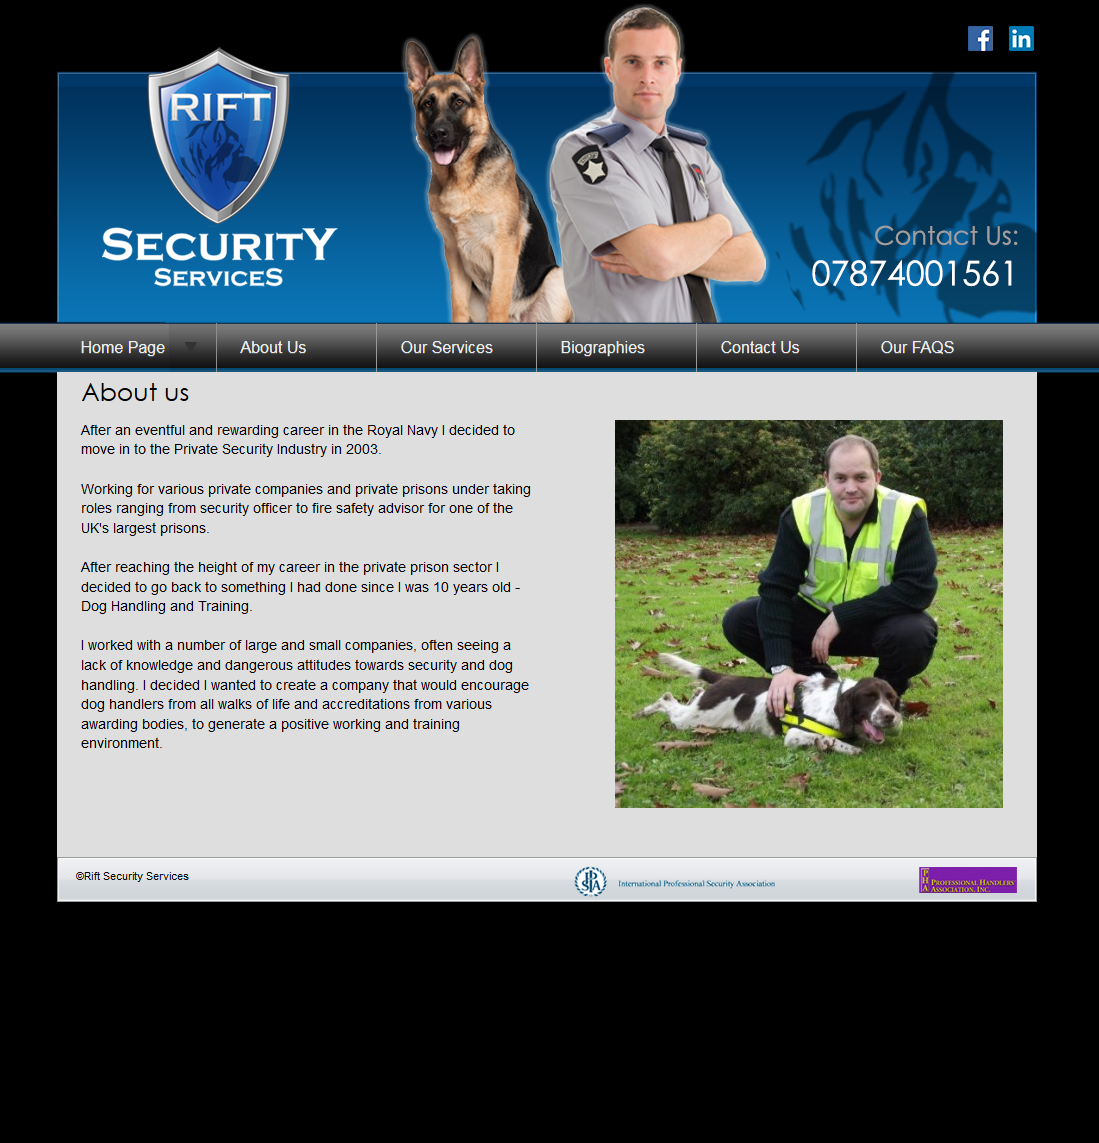 An image from the Rift Security Services website